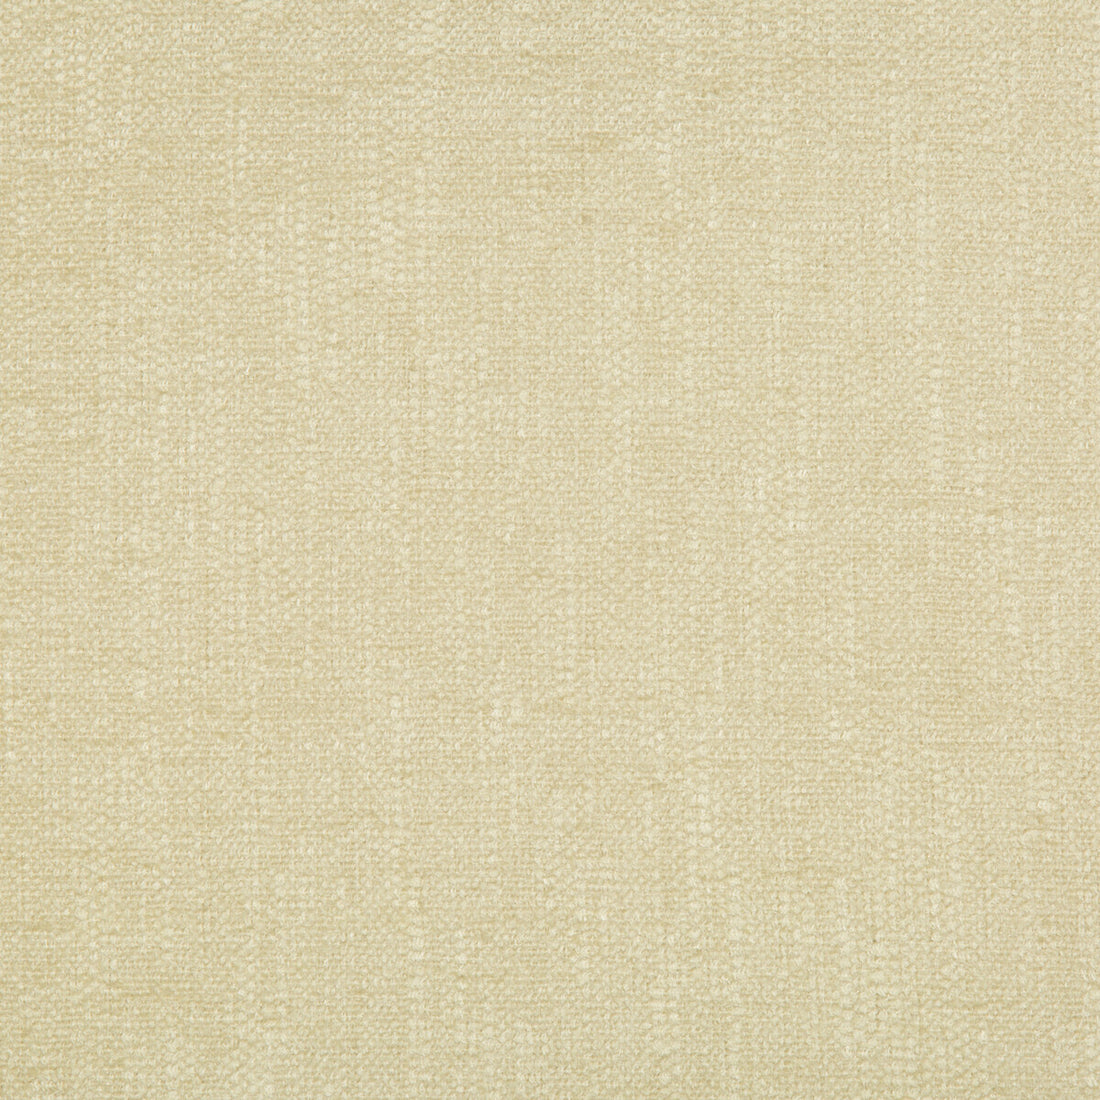 Kravet Contract fabric in 34636-116 color - pattern 34636.116.0 - by Kravet Contract in the Crypton Incase collection